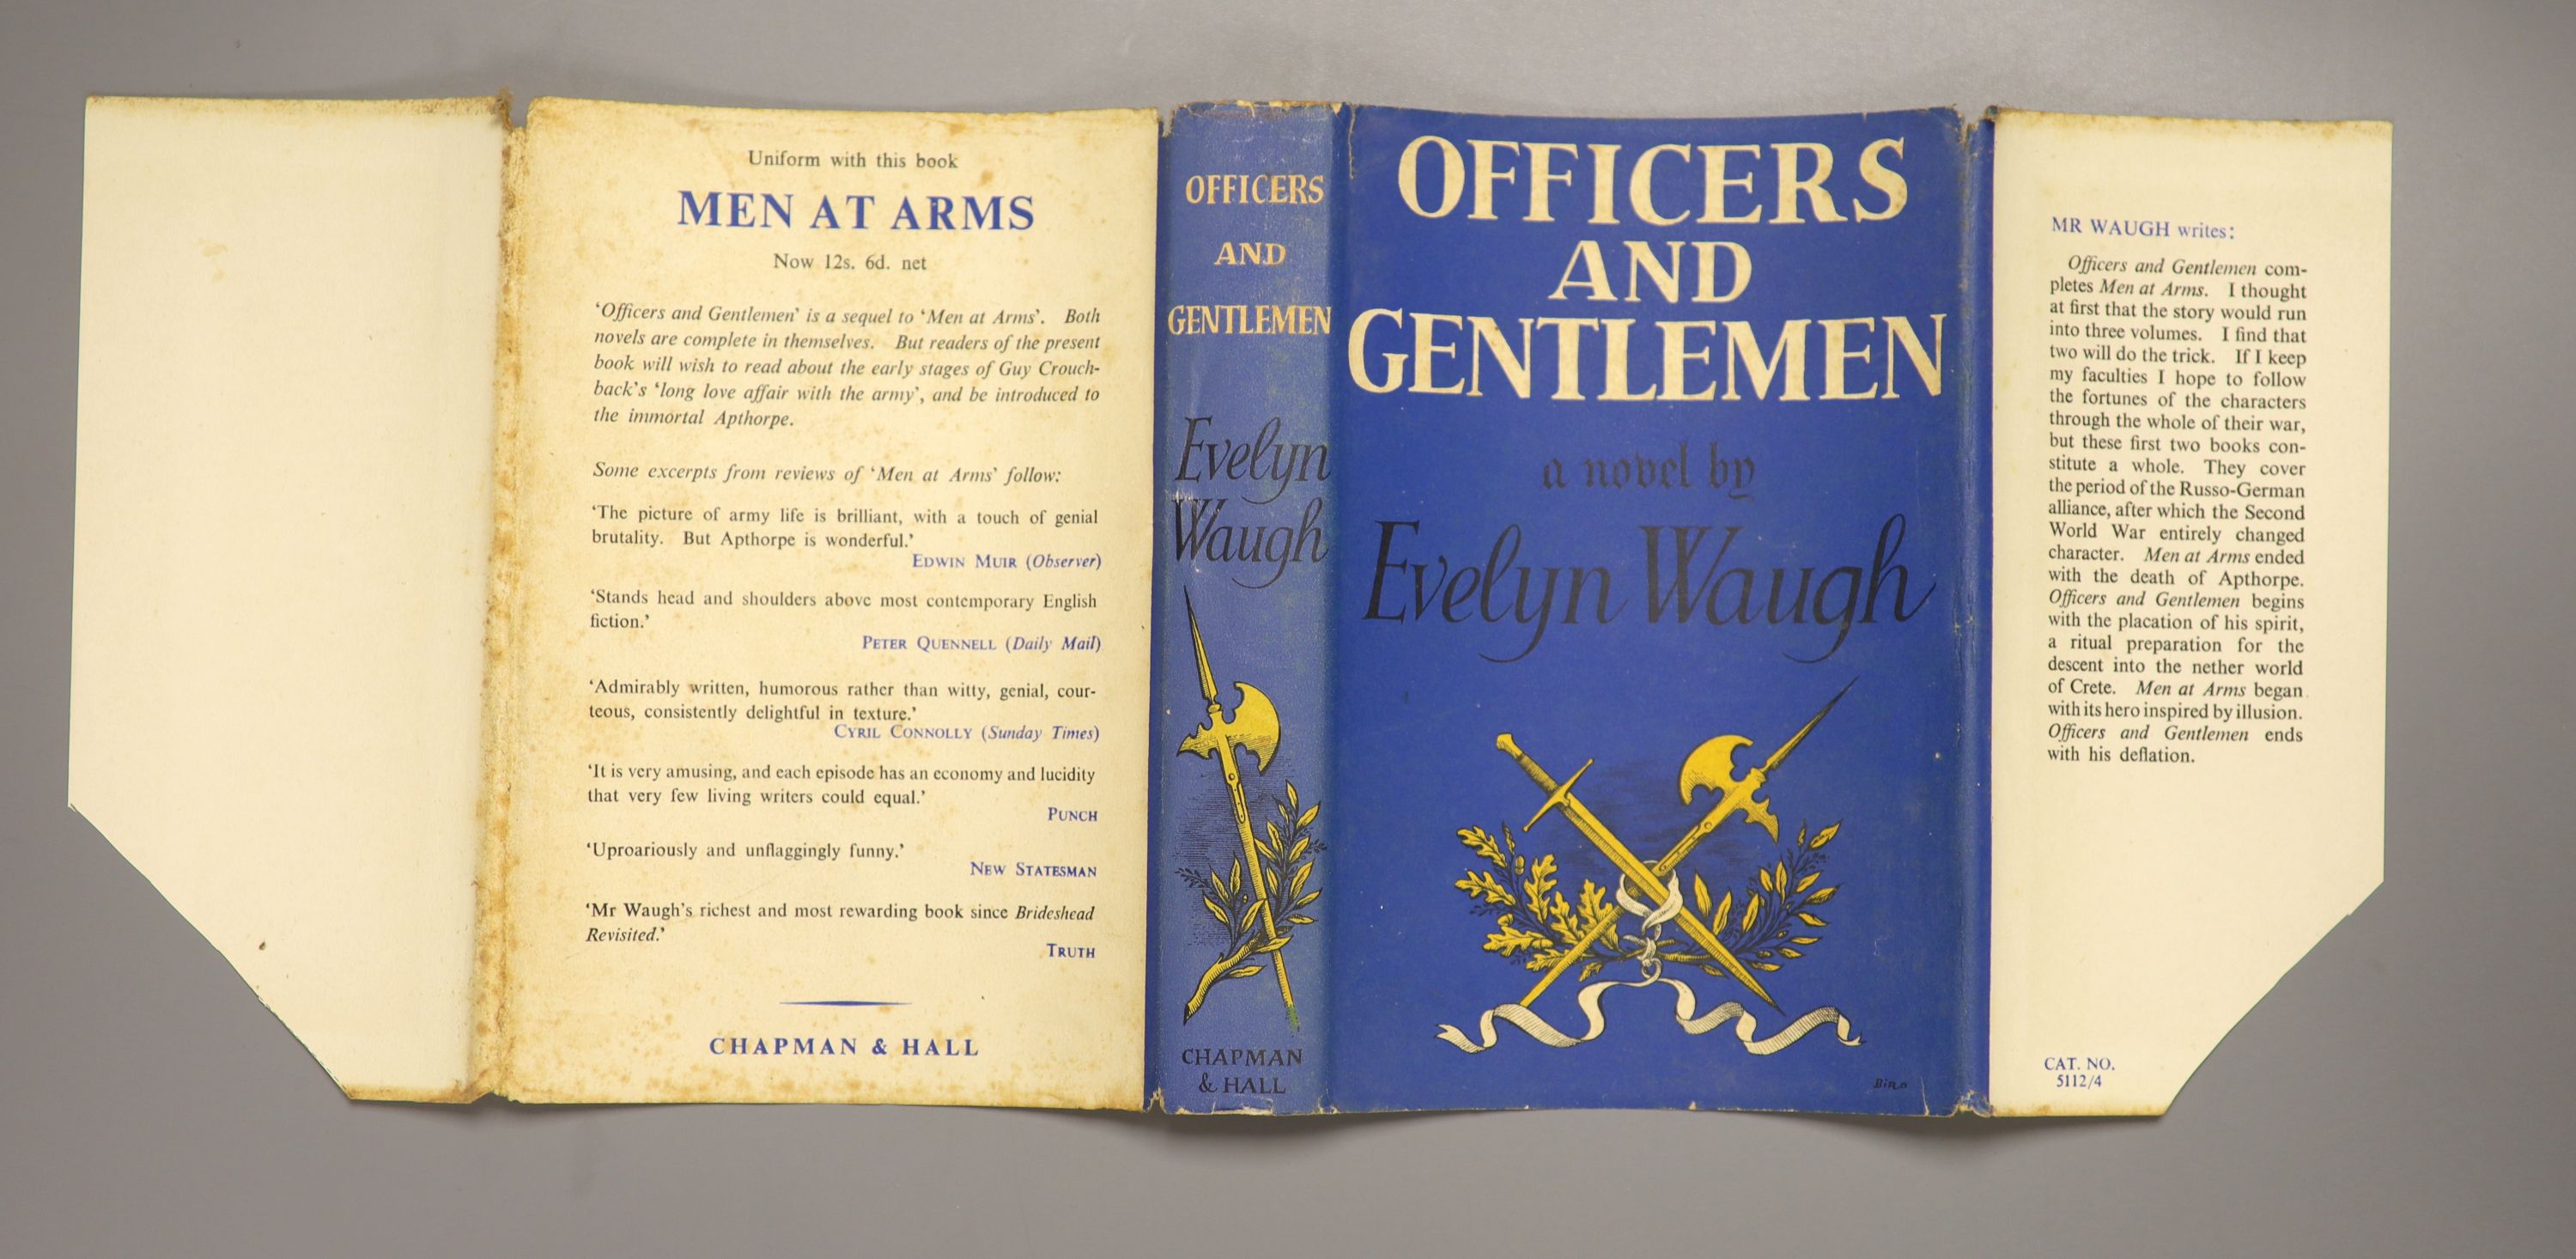 Waugh, Evelyn - 10 works - Love Among the Ruins, 1st edition, in unclipped d/j, ownership inscriptions to front fly leaf, spotting to early leaves, Chapman and Hall, London, 1953; Officers and Gentlemen, 1st edition, in